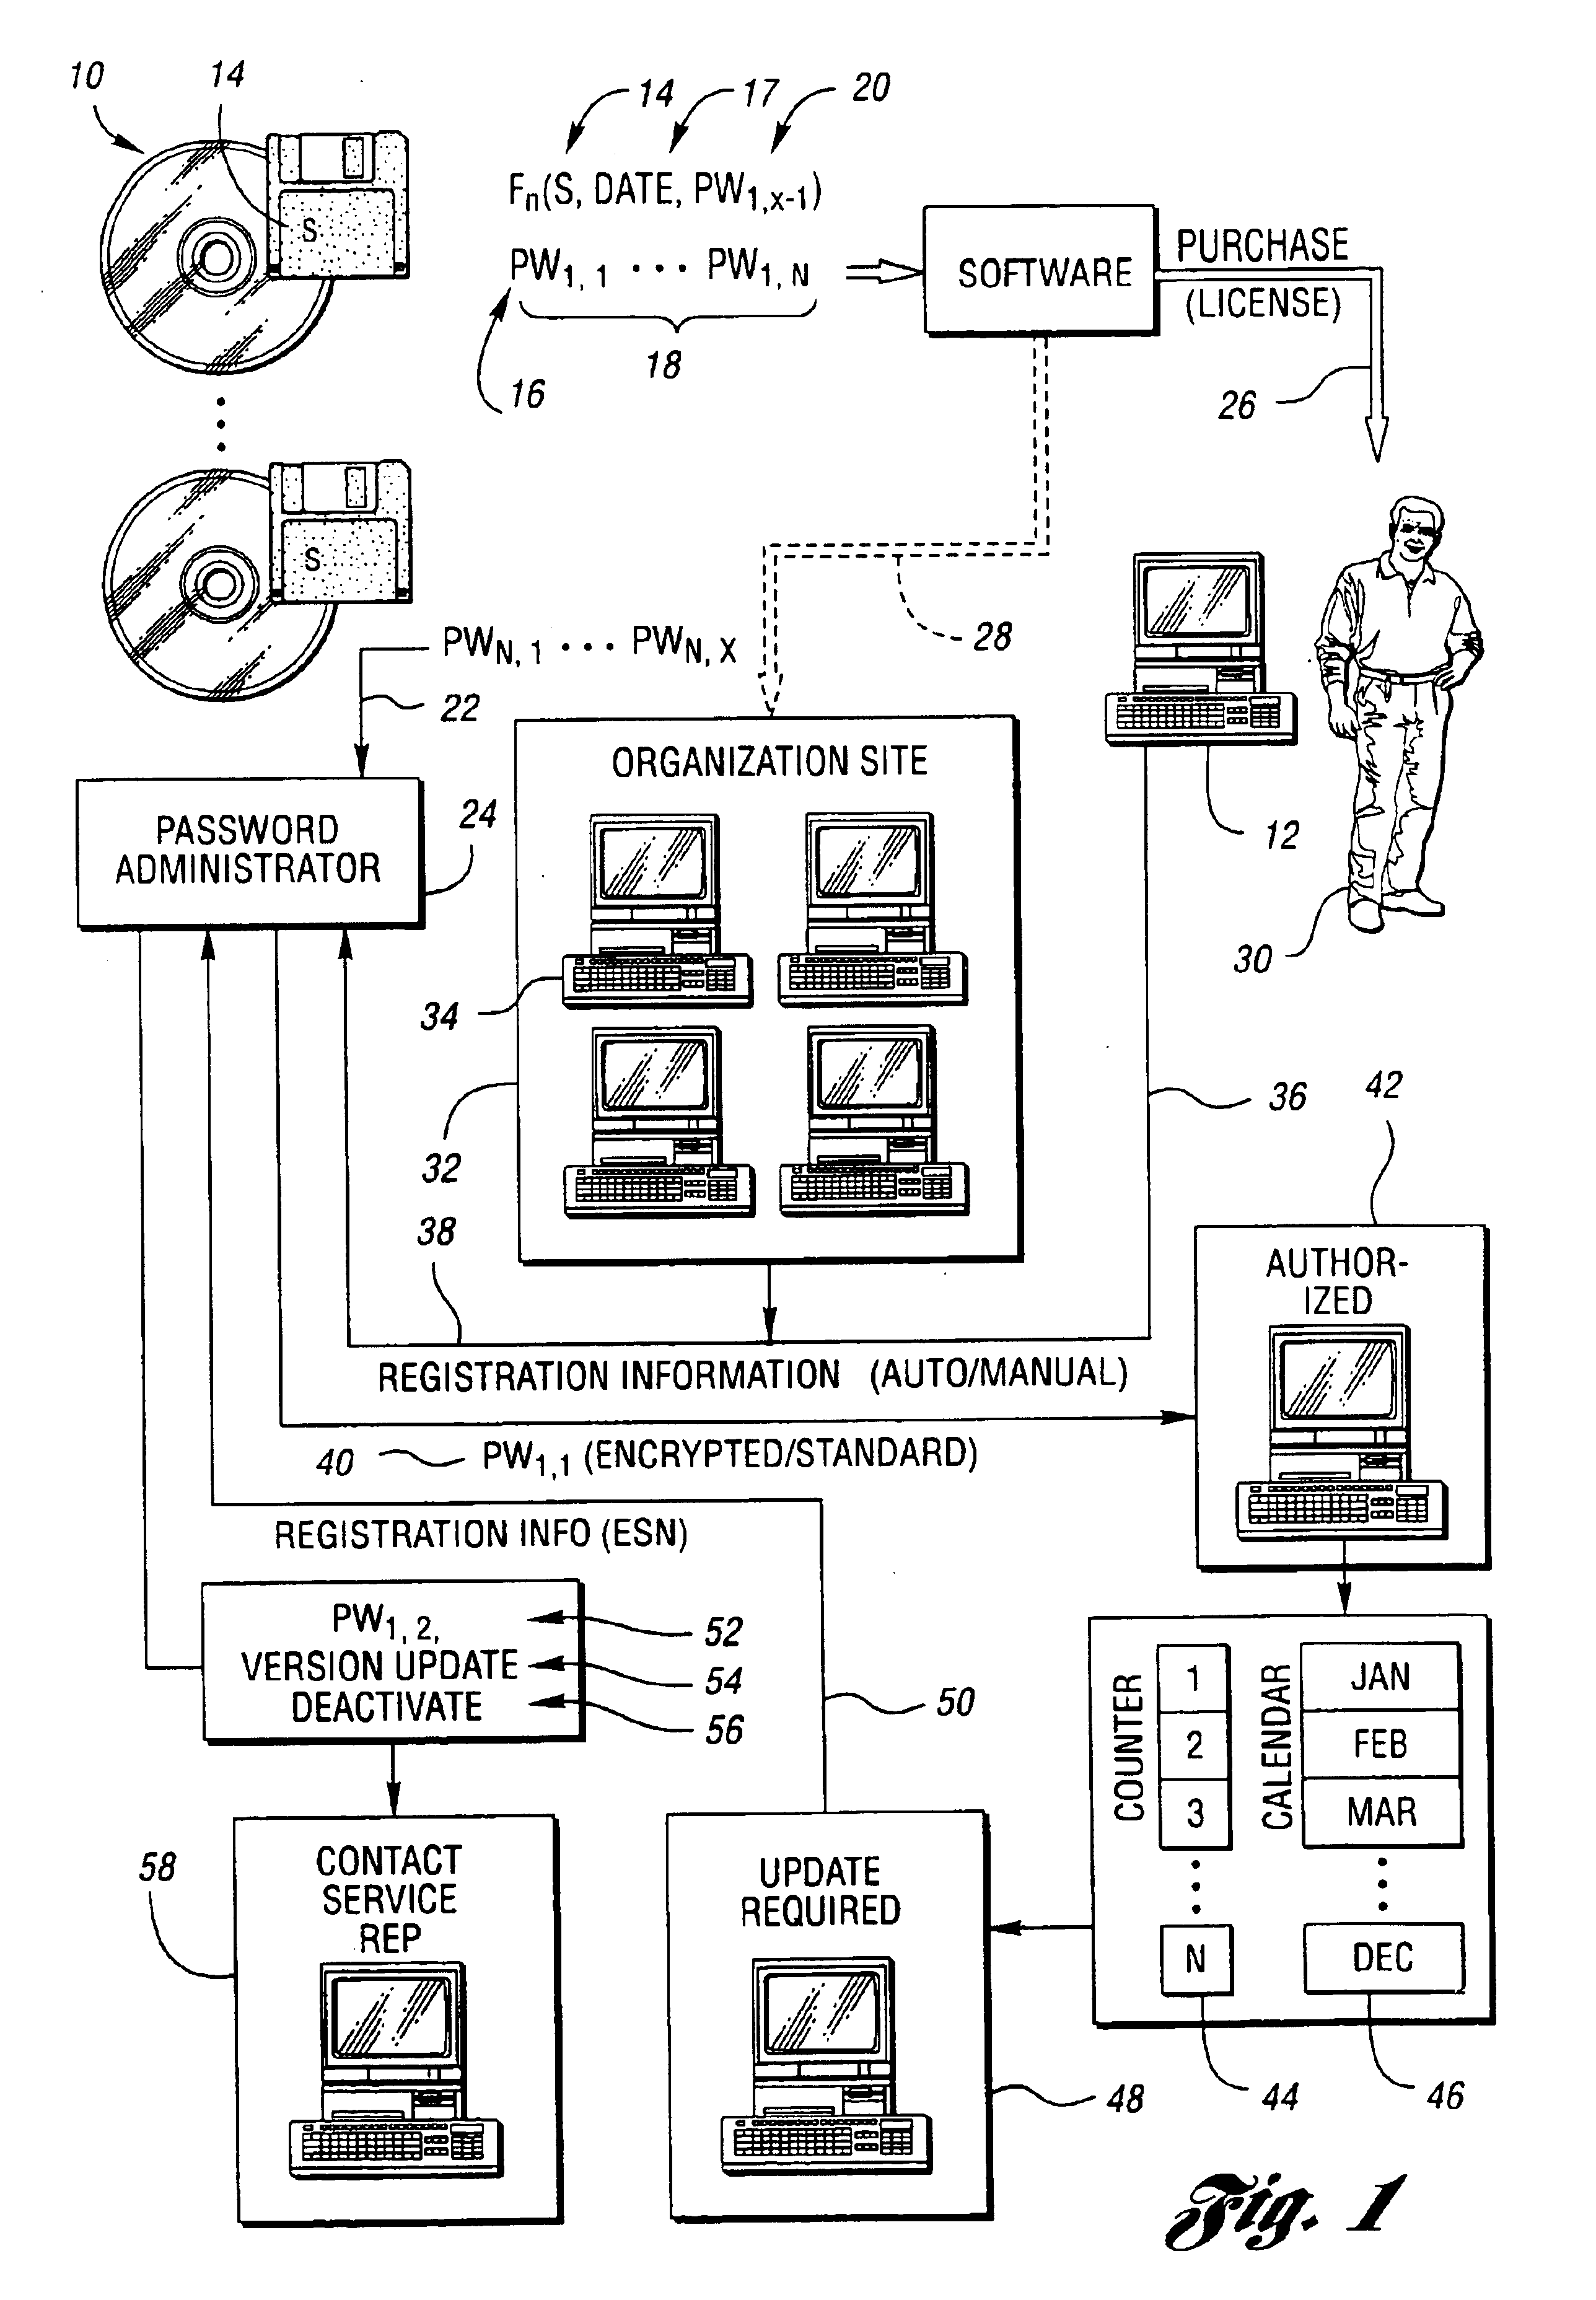 Method for monitoring software using encryption including digital signatures/certificates